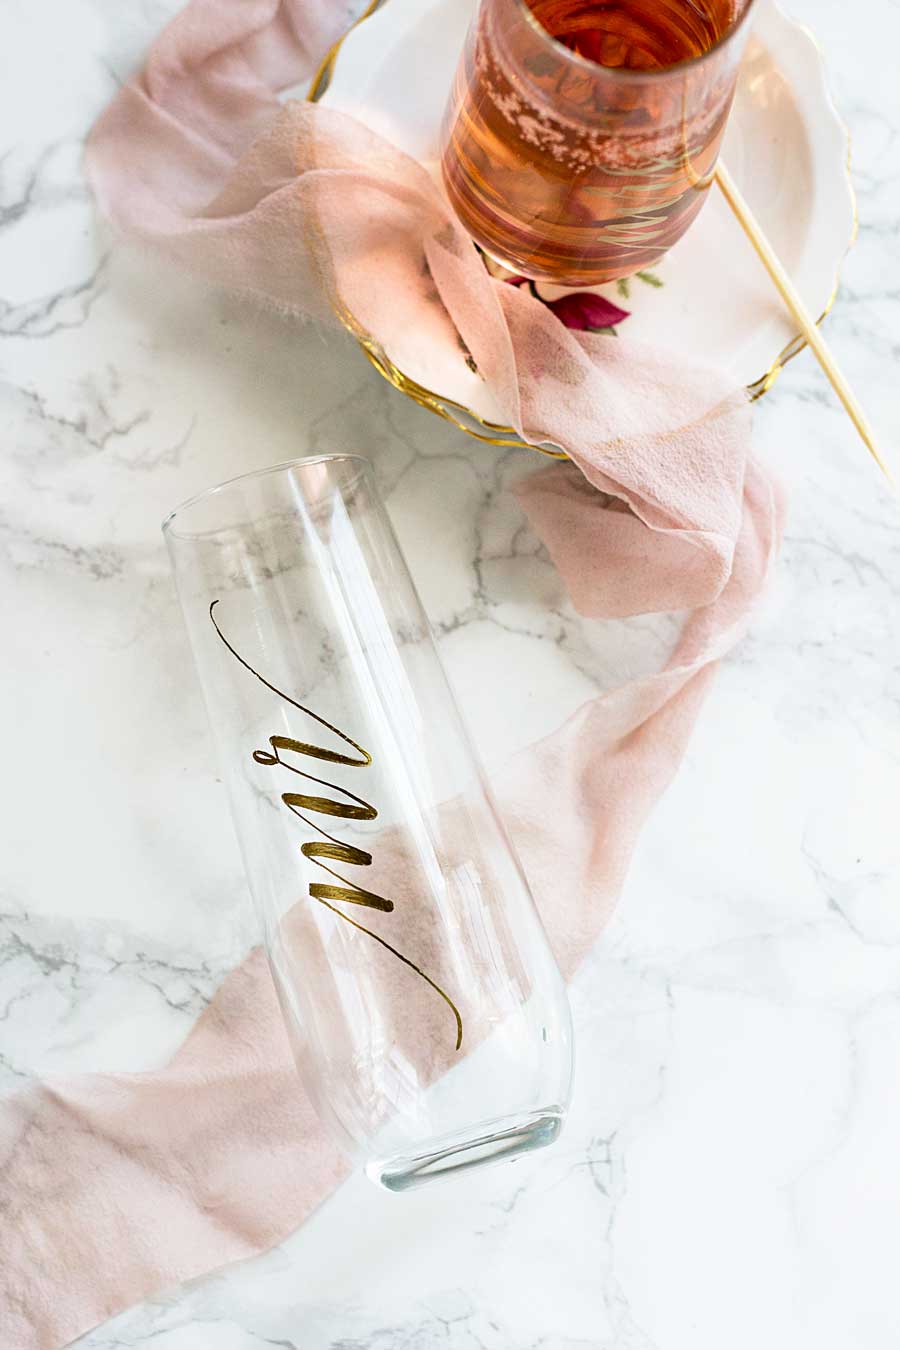 Make these fun and festive wedding champagne flutes for your own wedding or to give as gifts to all your friends. All you need are glasses and paint pen! Wedding champagne glasses. DIY wedding champagne flutes. Mr and Mrs champagne glasses.